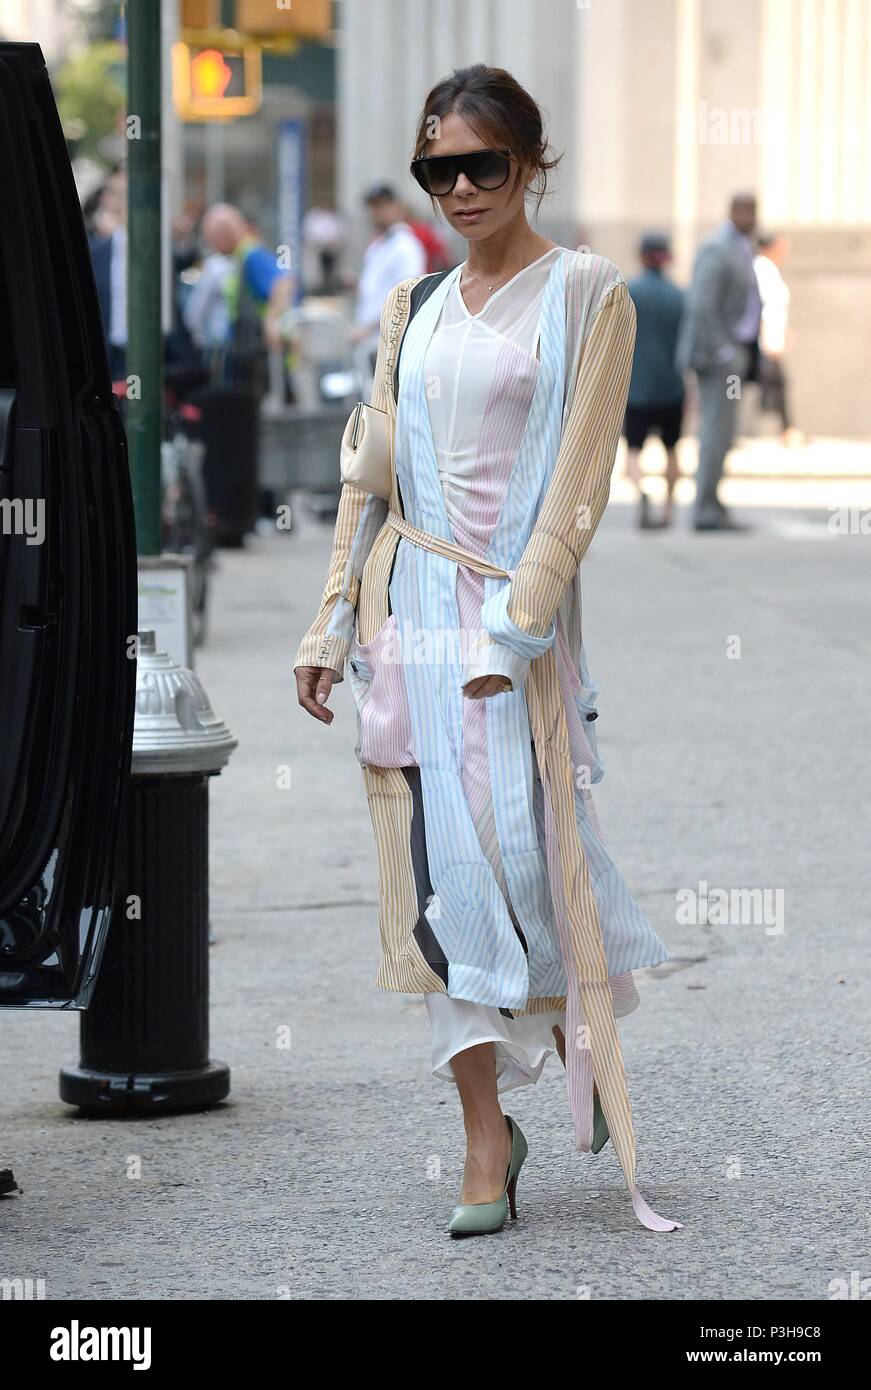 New York, NY, USA. 18th June, 2018. Victoria Beckham out and about for Celebrity Candids - MON, New York, NY June 18, 2018. Credit: Kristin Callahan/Everett Collection/Alamy Live News Stock Photo